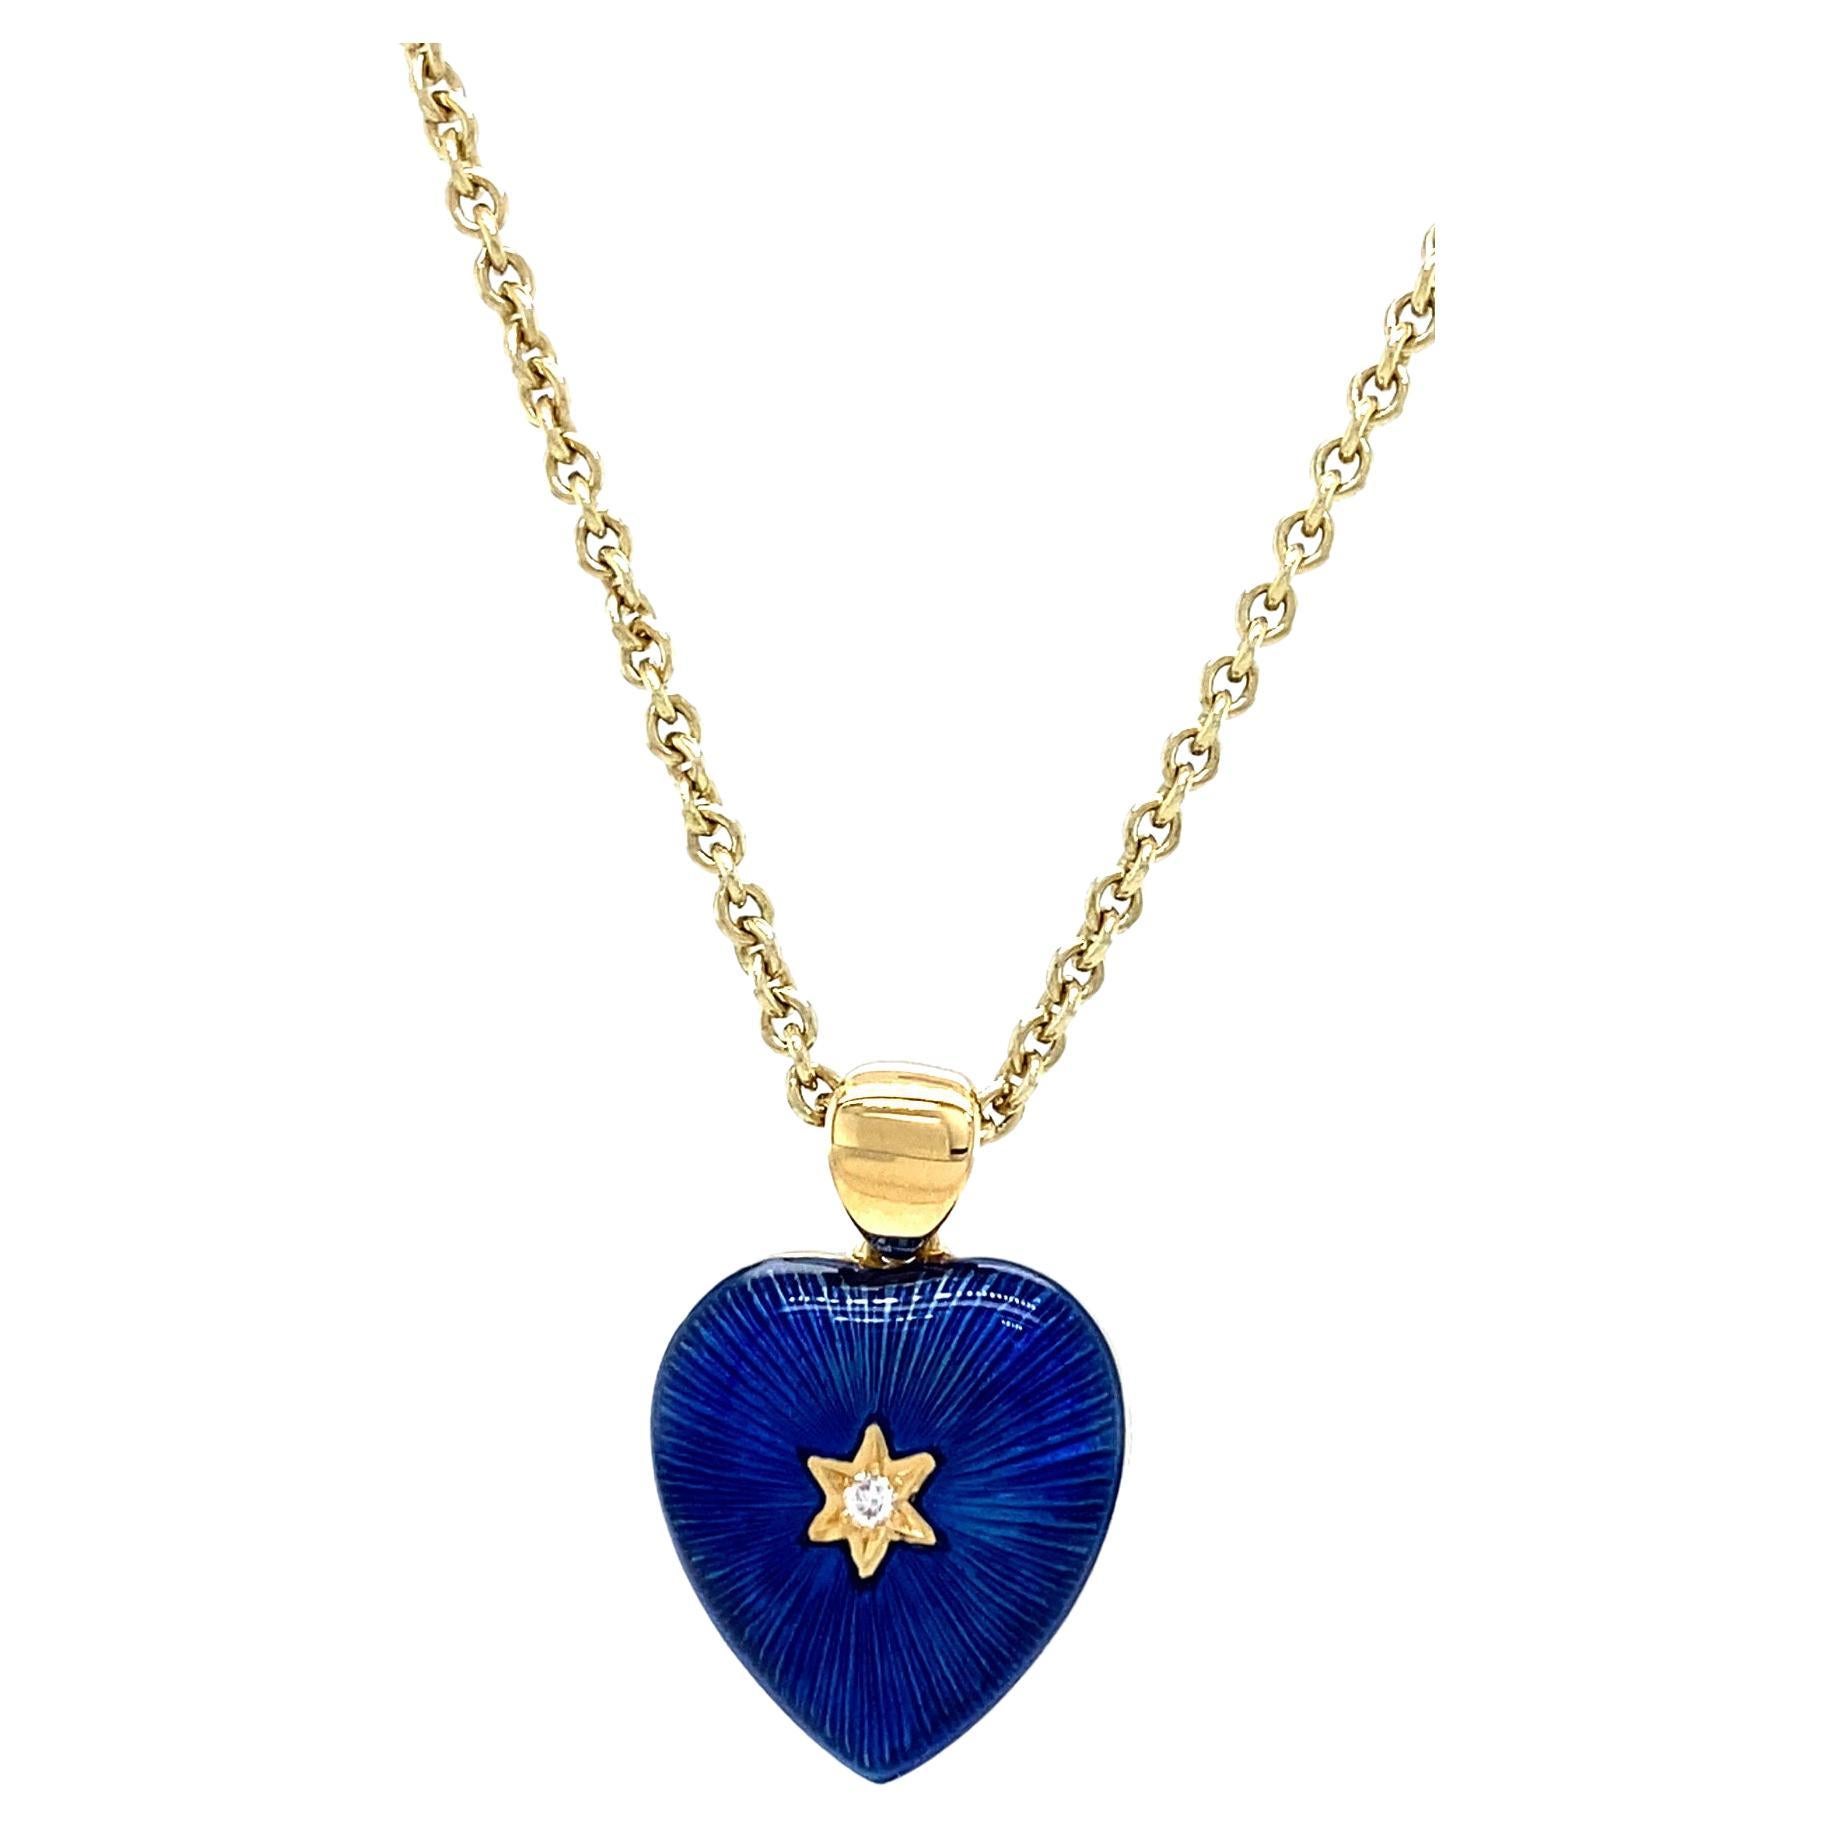 Victor Mayer heart shaped two colored pendant necklace 18k yellow gold, dark blue and light blue vitreous enamel, 2 diamonds, total 2.02 ct, G VS, measurements app. 11.8 mm x 13.0 mm

About the creator Victor Mayer
Victor Mayer is internationally